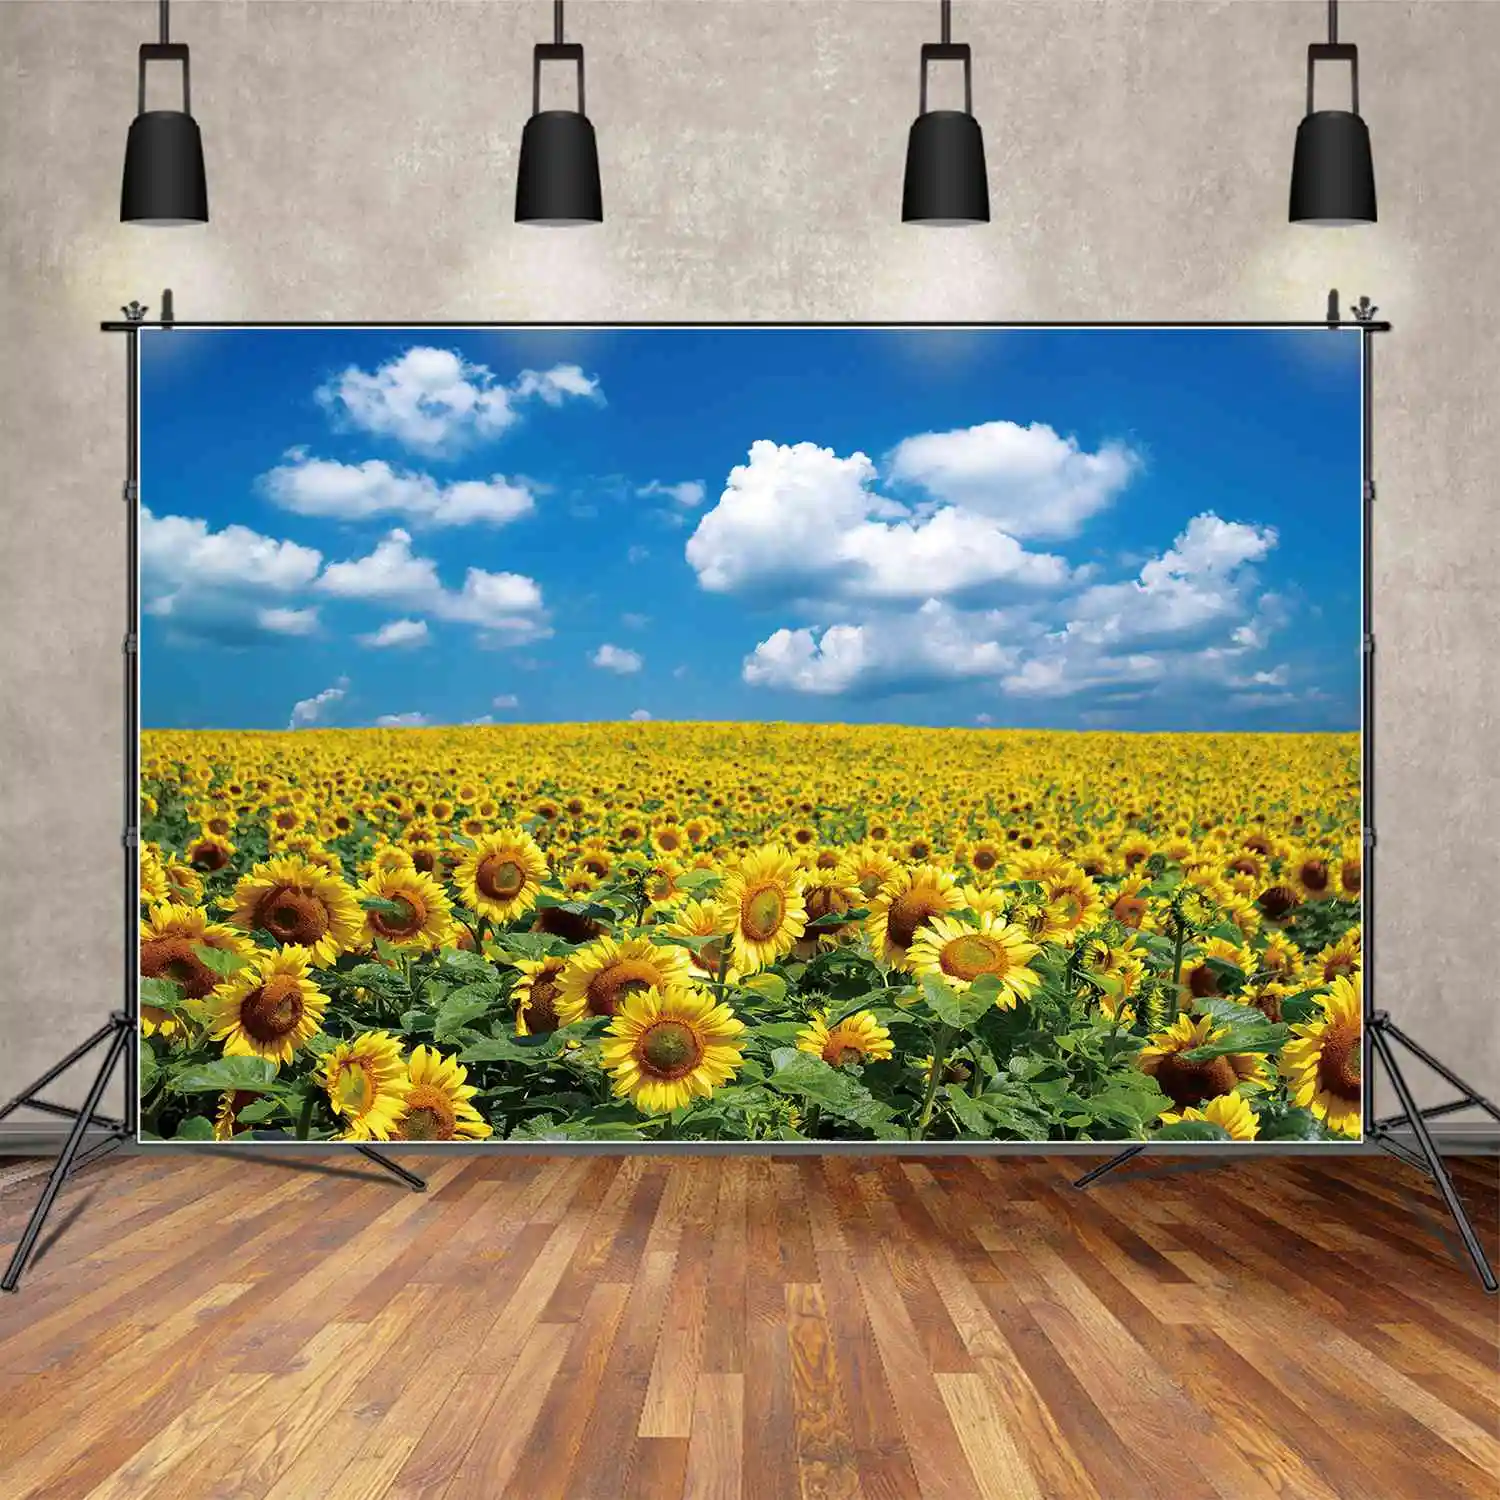 

MOON.QG Photography Backdrop Autumn Decoration Sunflower Field Shooting Prop Background White Cloud Blue Sky Holiday Accessories